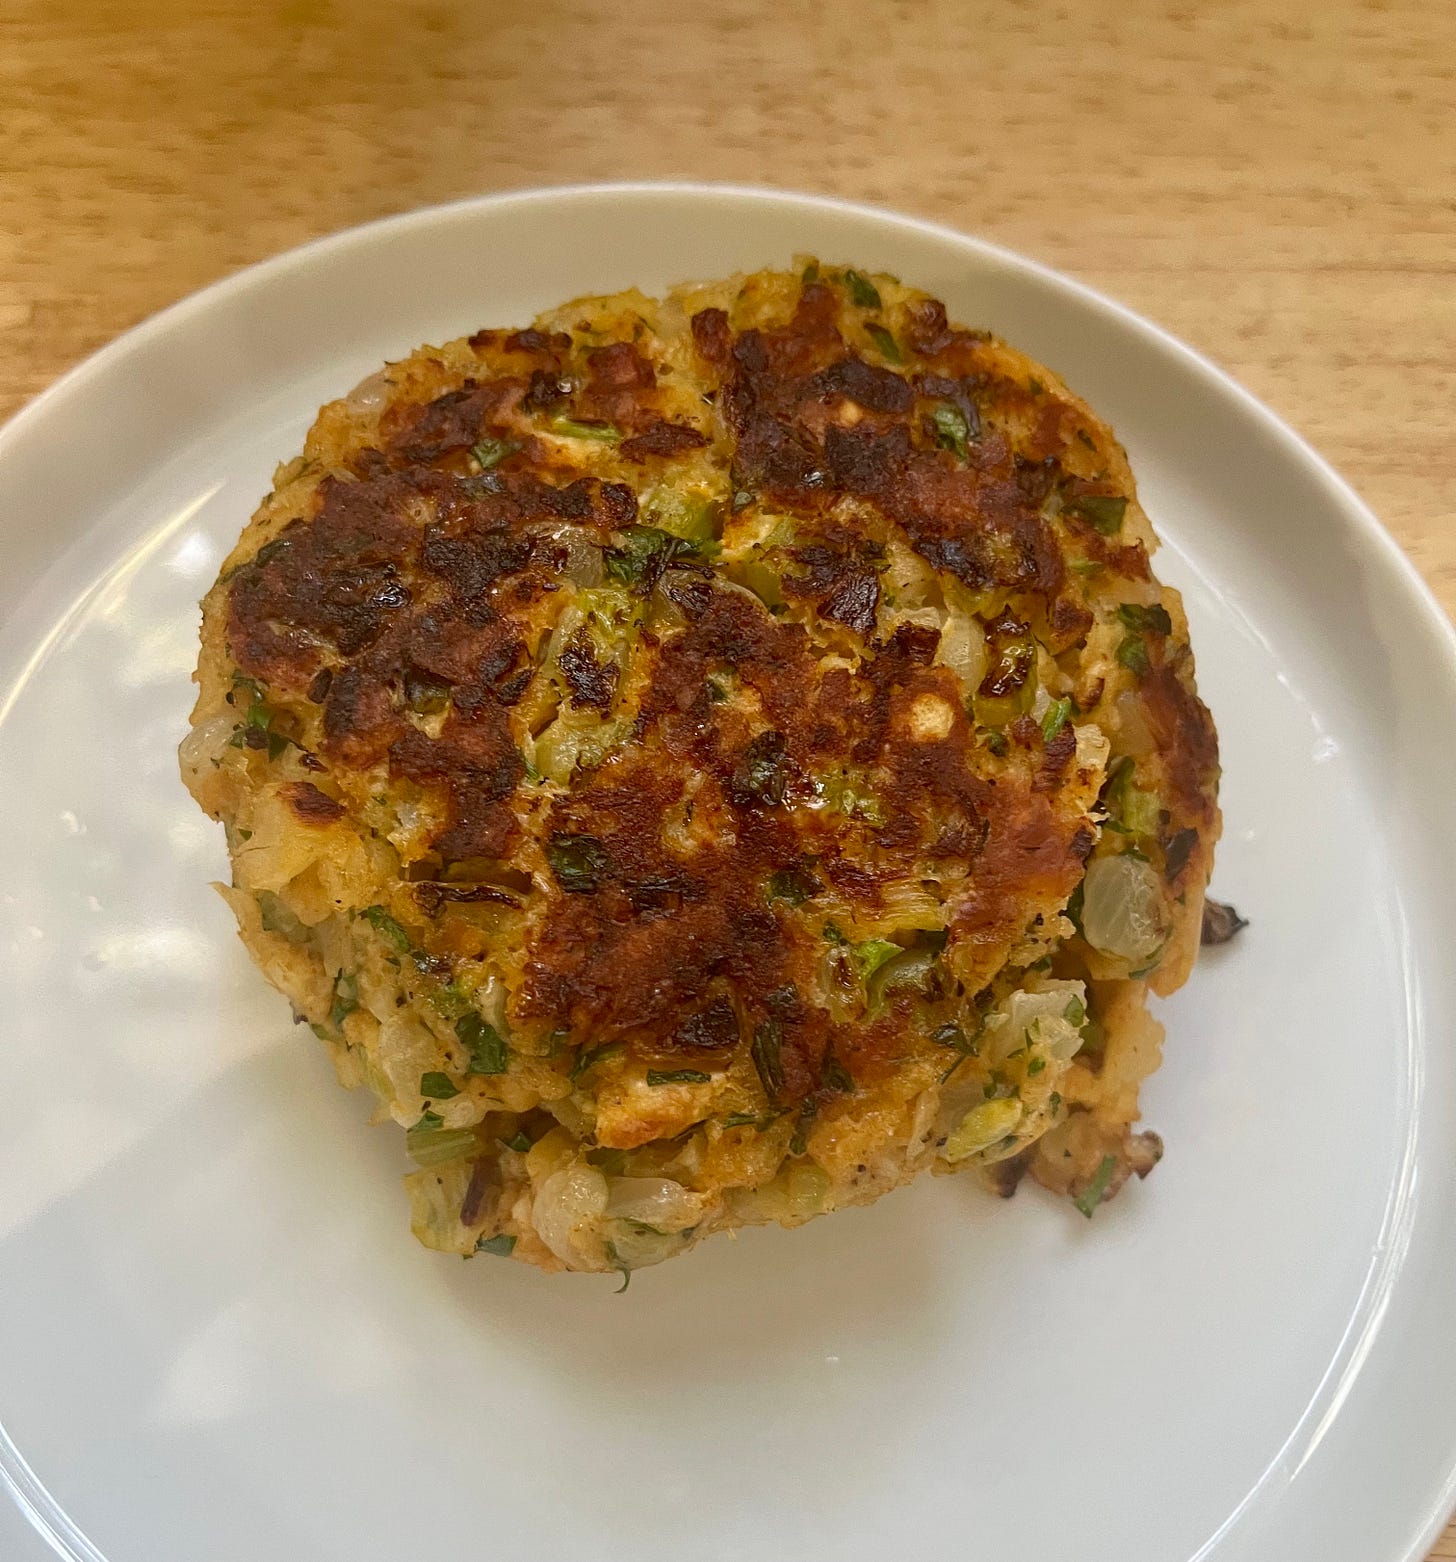 A perfectly browned cod cake with big chunks of fish and sauteed onion